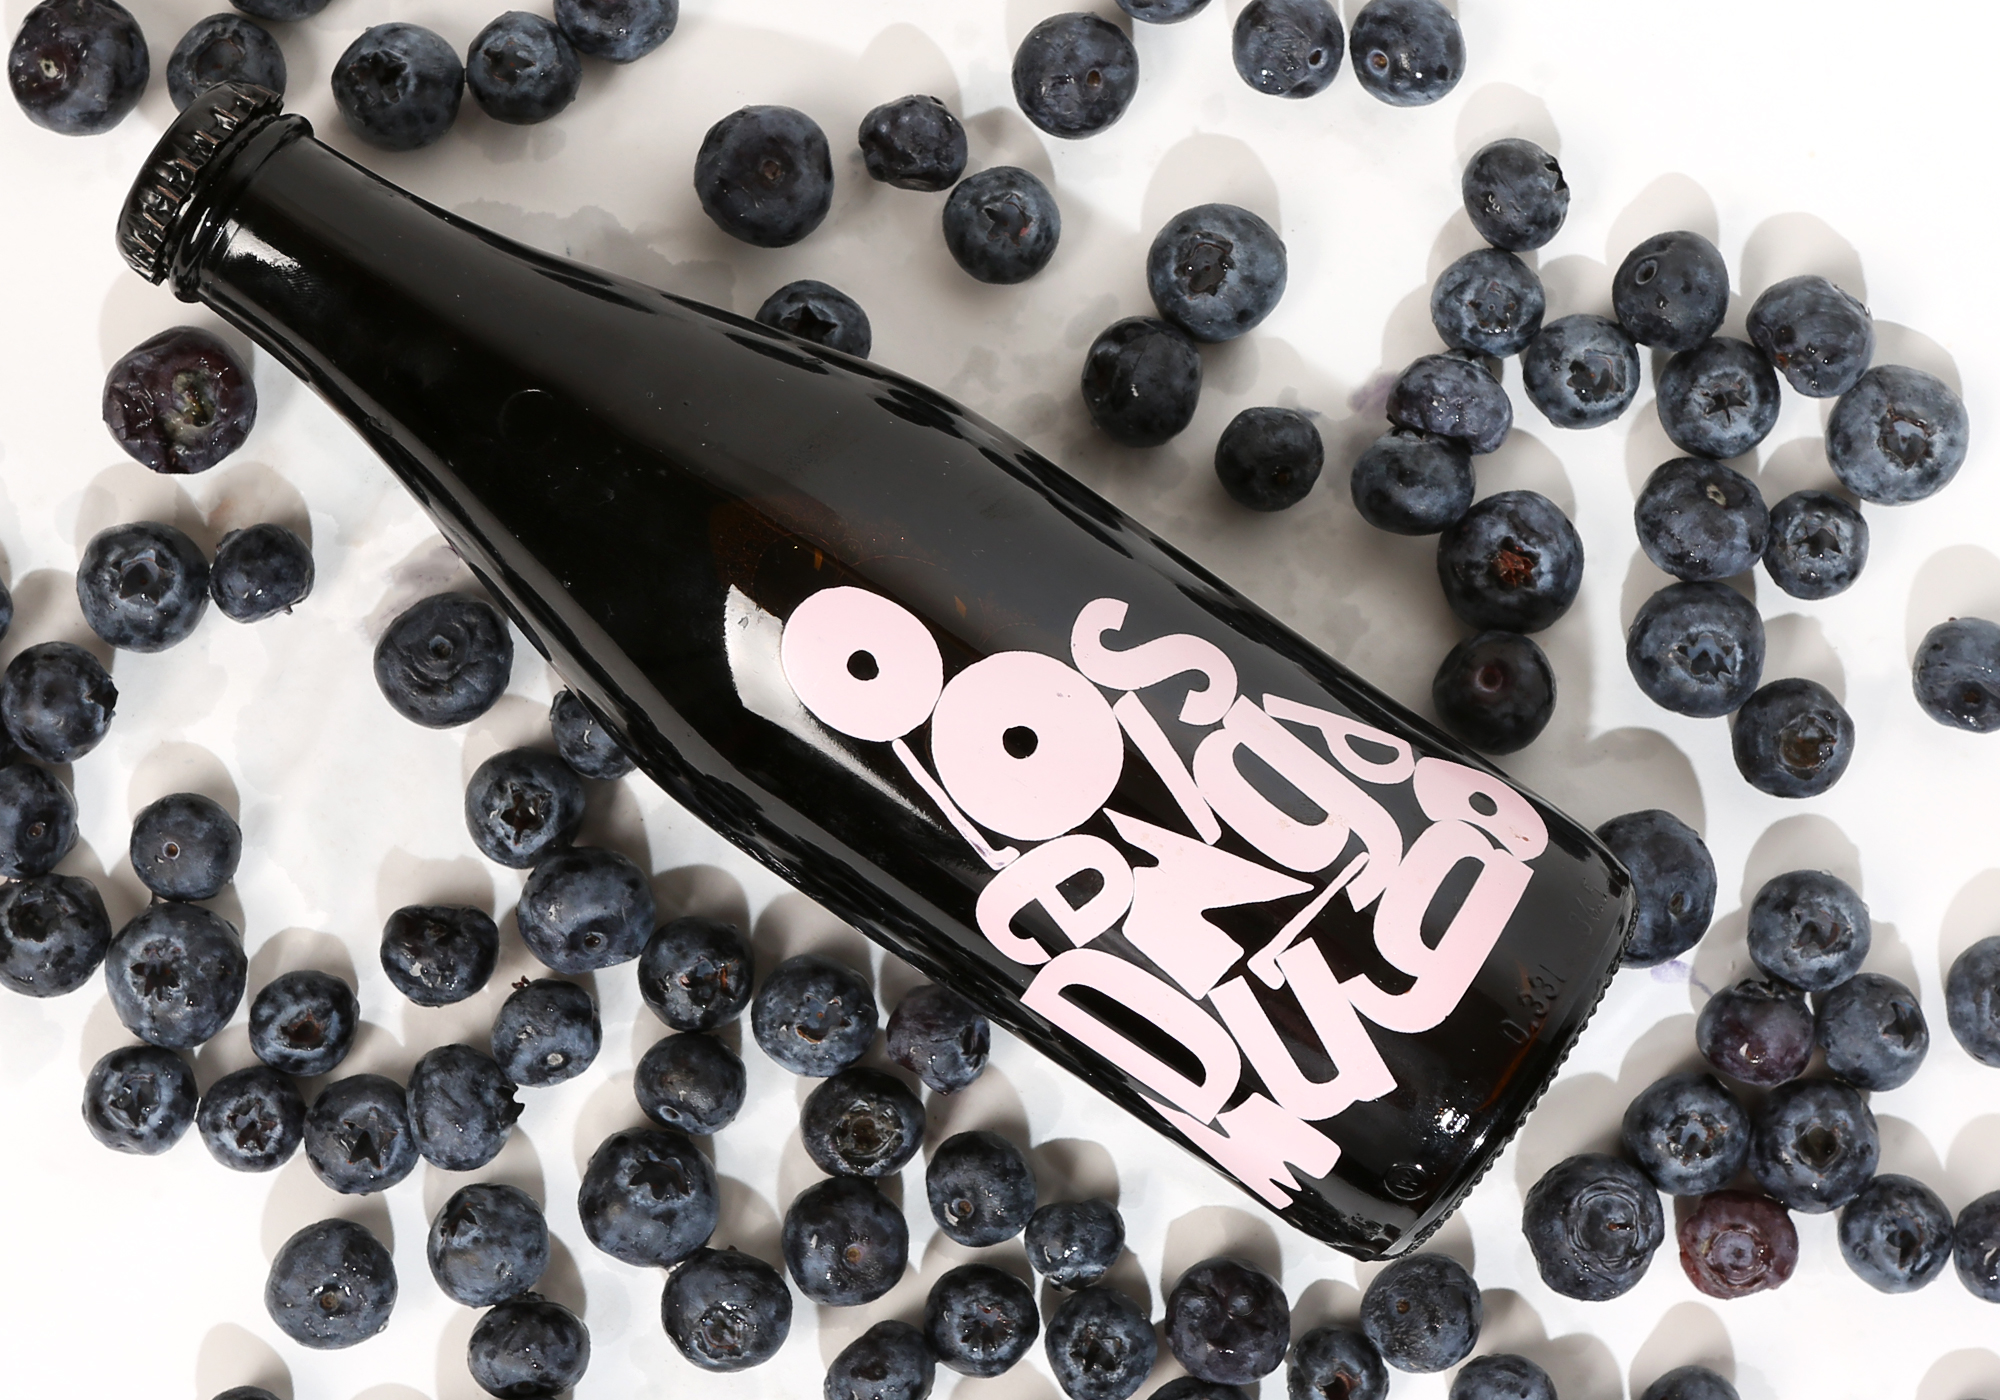 omnipollo's anagram stout is packed with blueberries